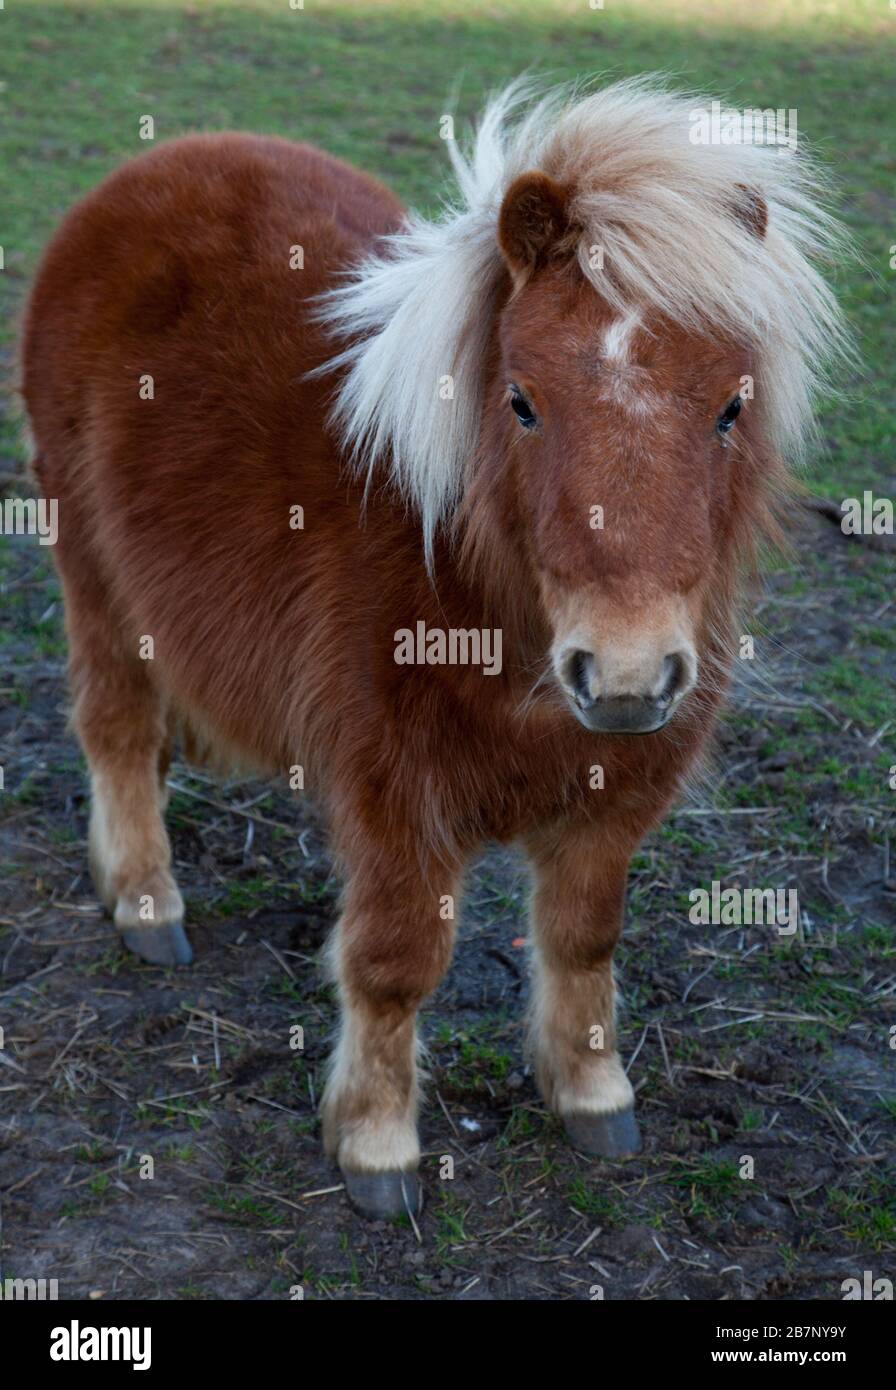 close up portrait of a small light brown Shetland pony Stock Photo